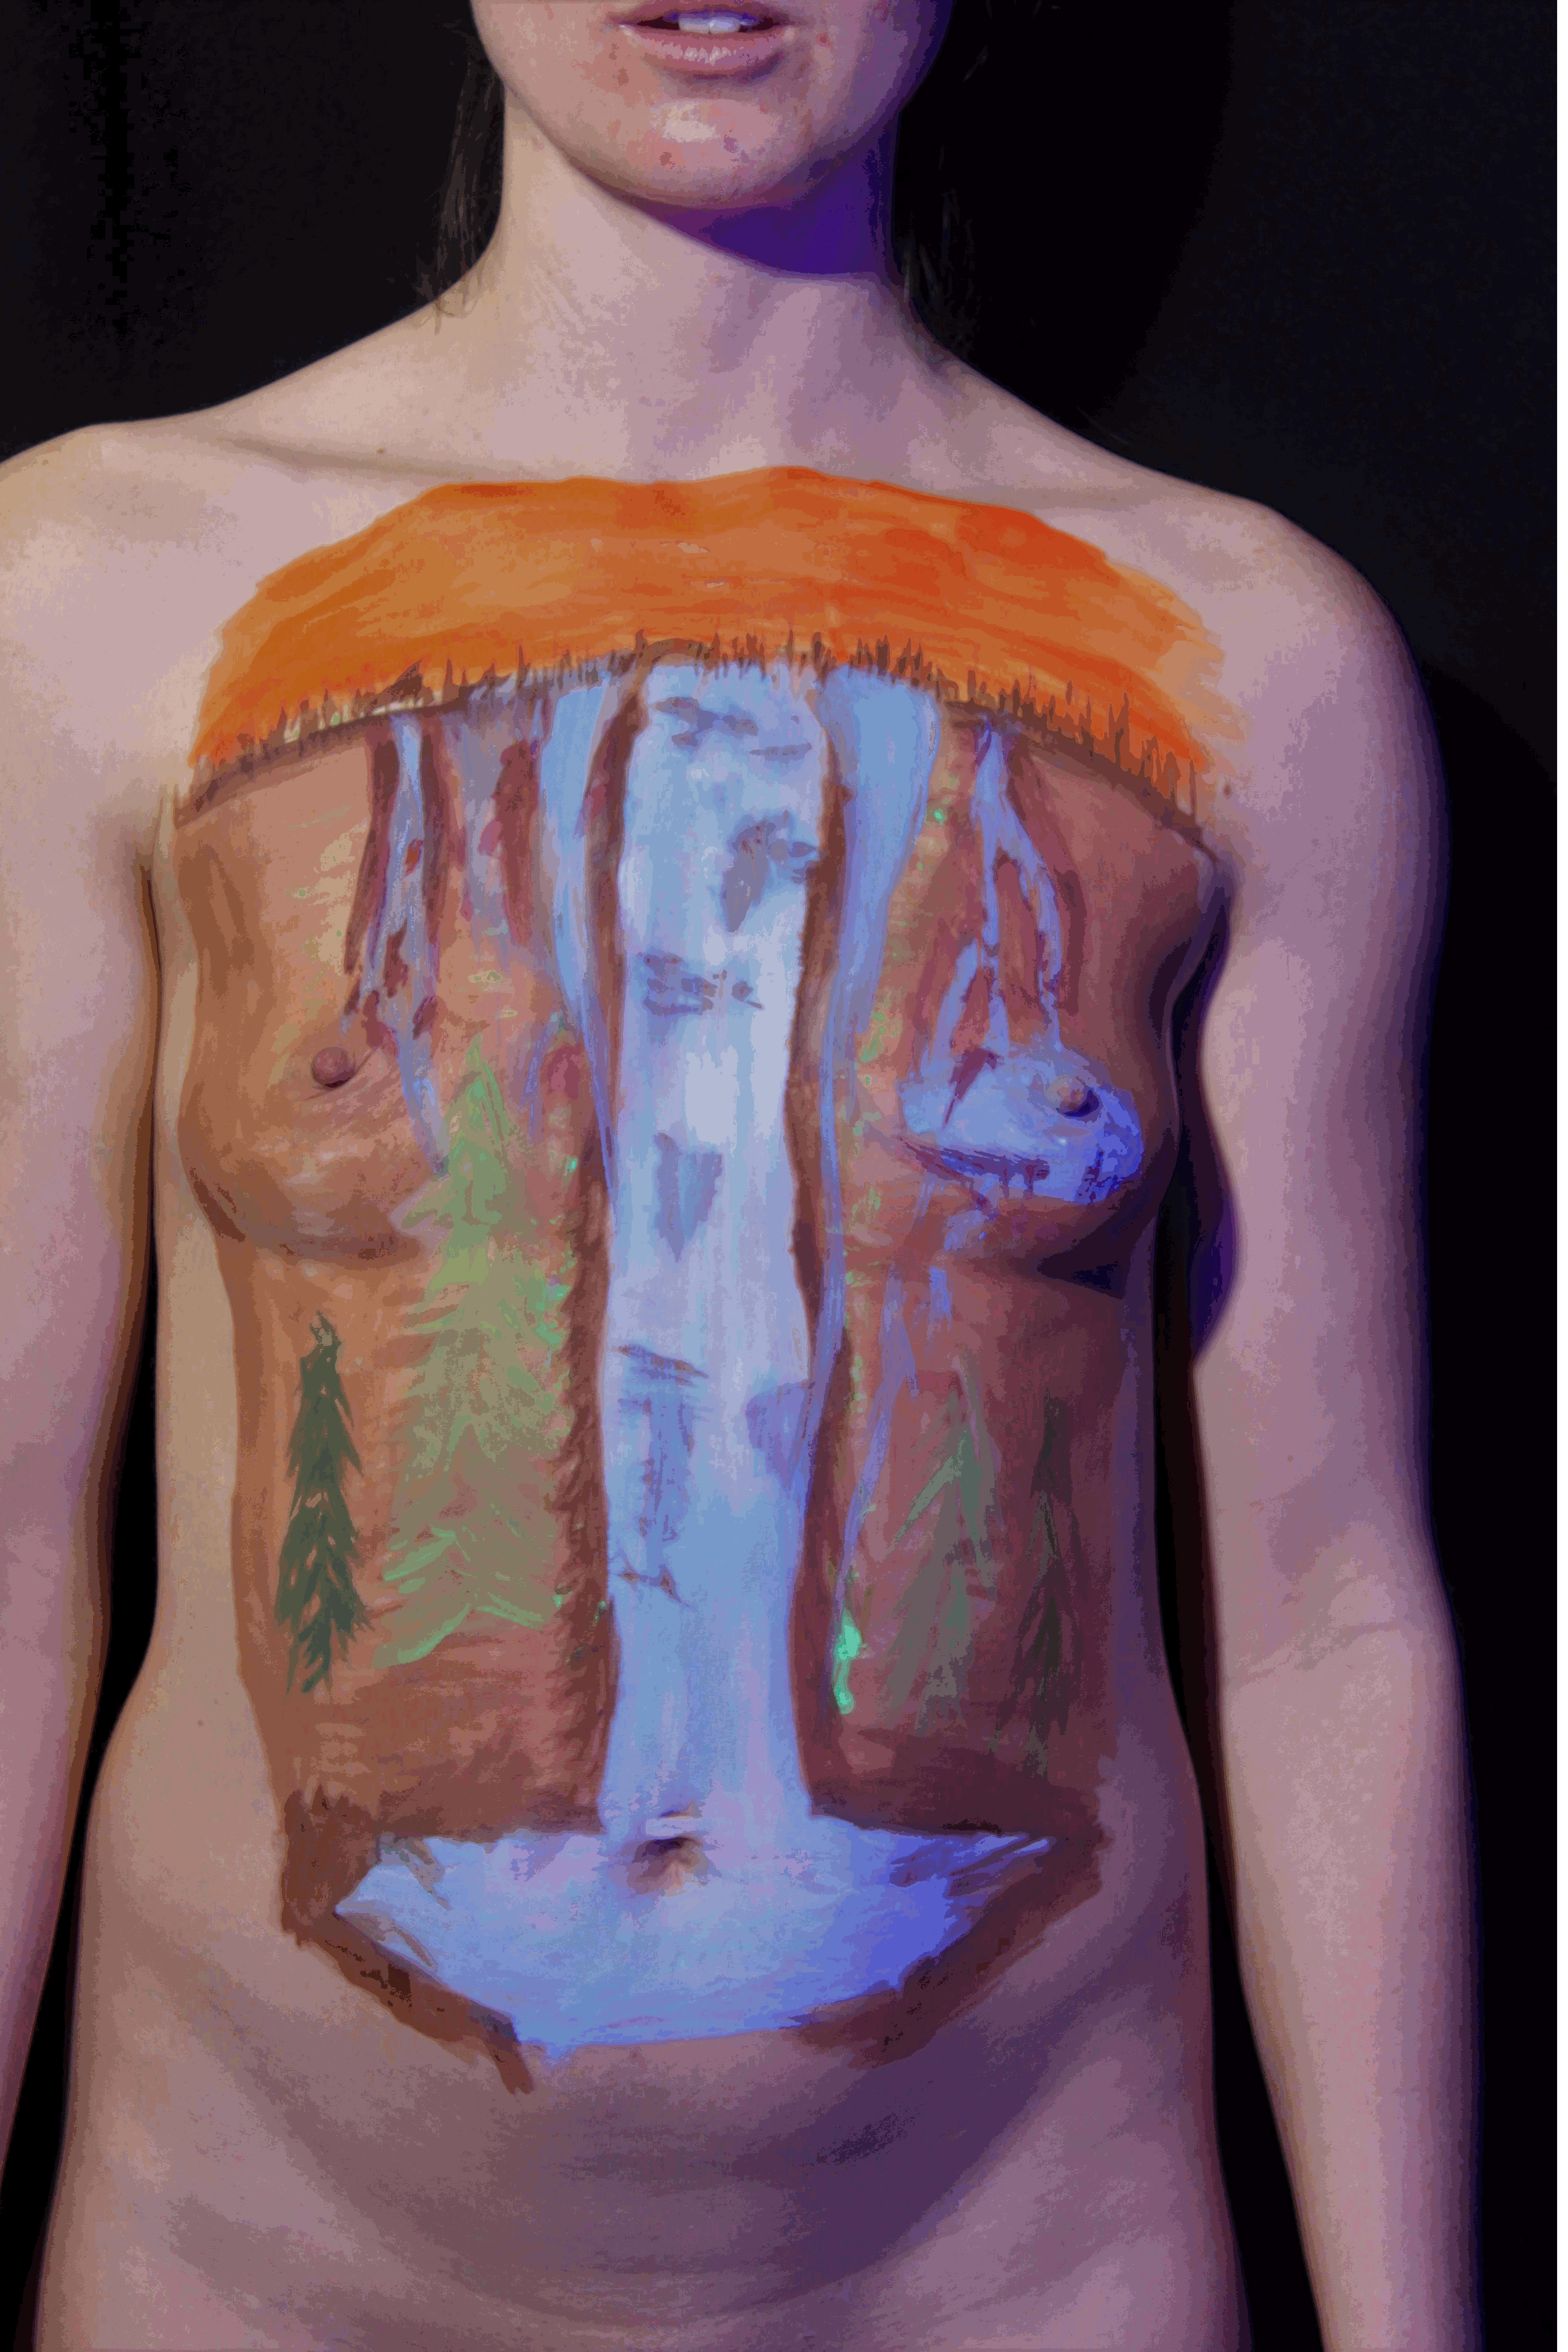 Waterfall in U V body paint on female torso switching between day light and U V light